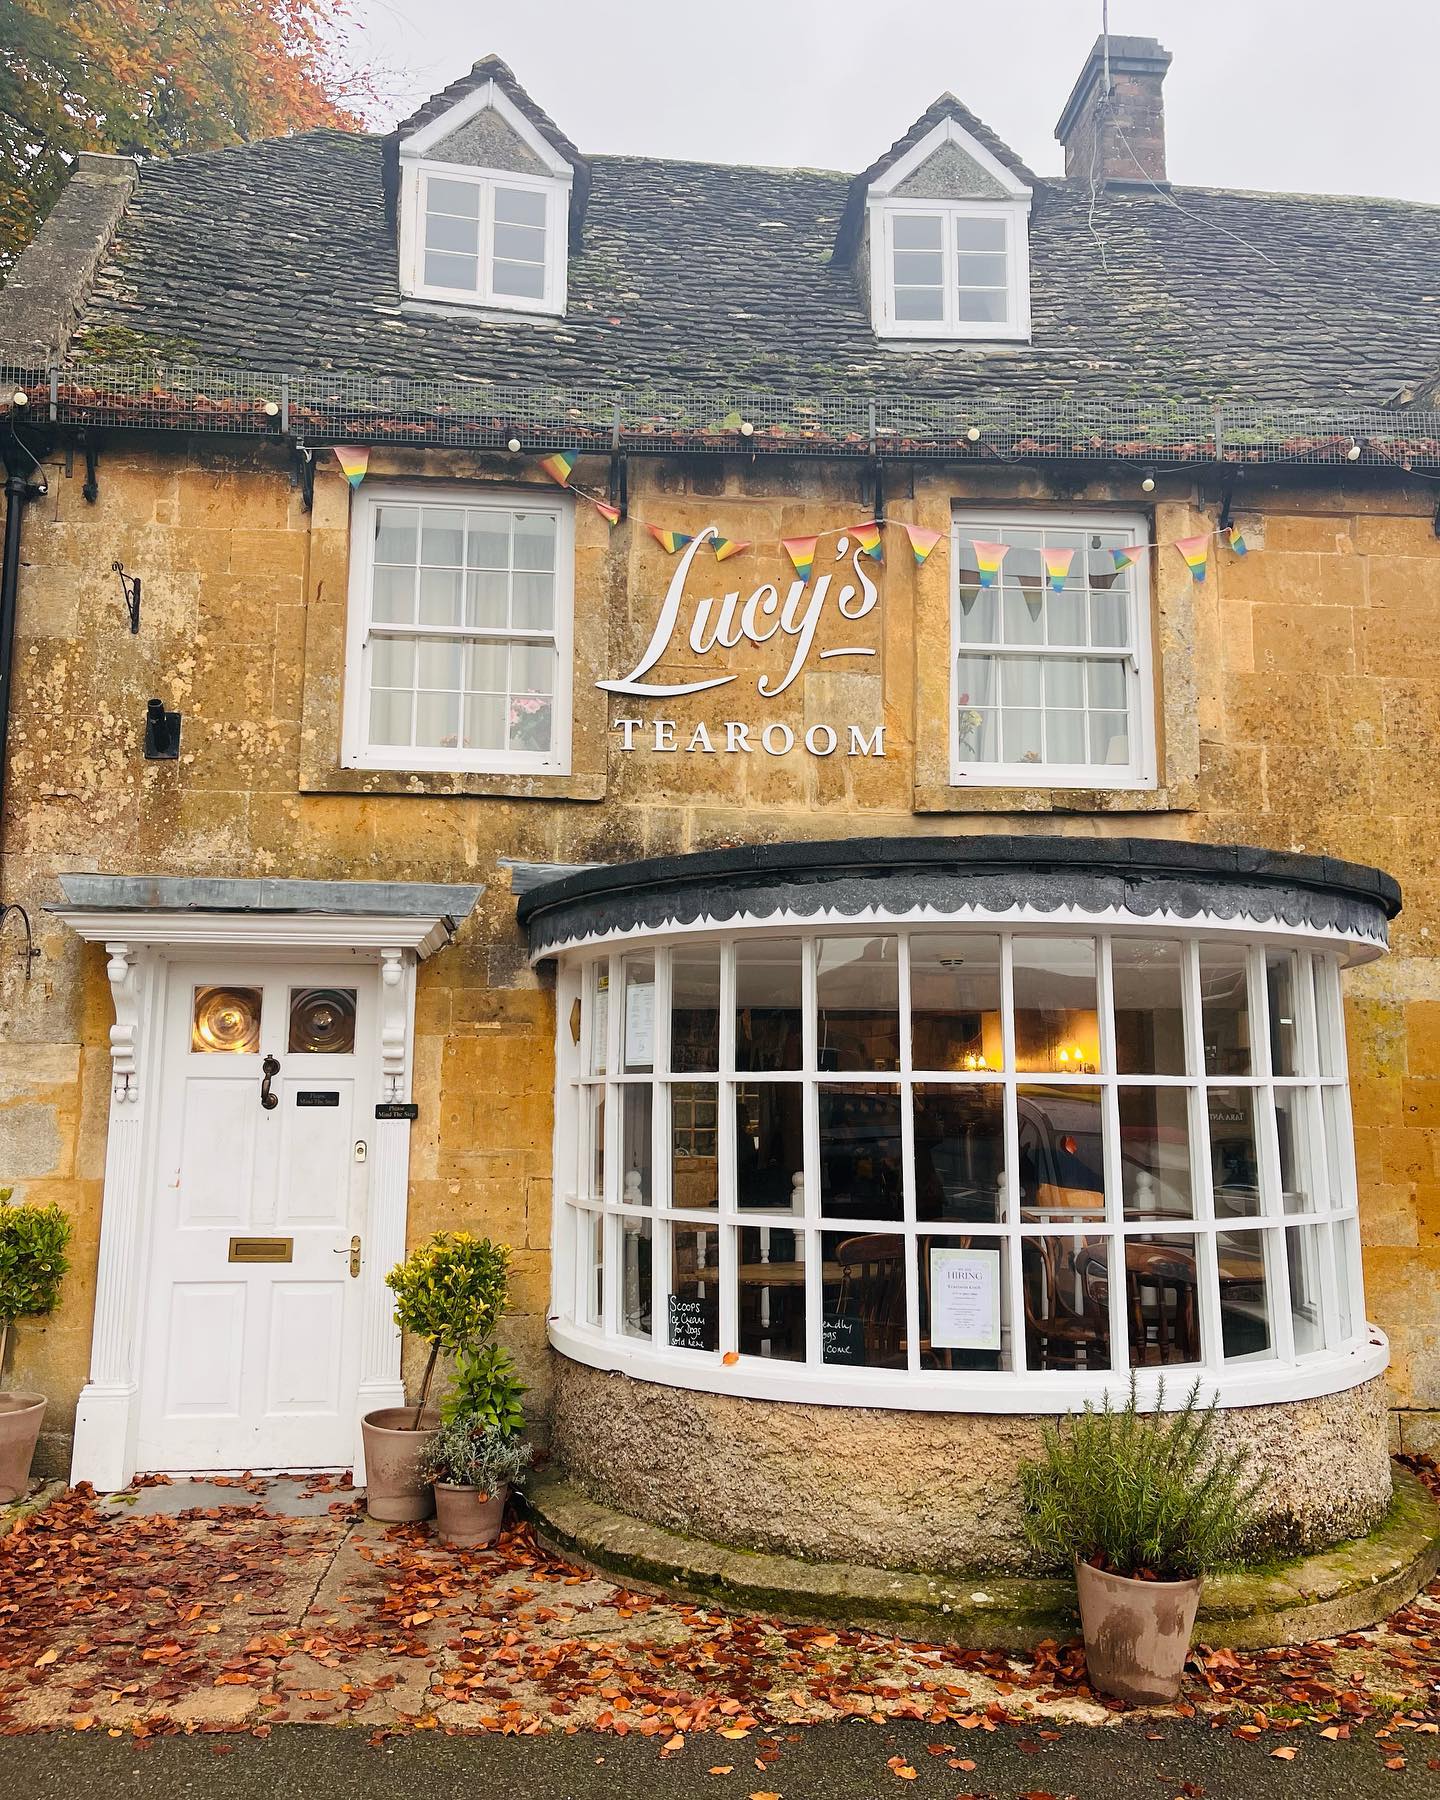 Lucy's Tearoom, Stow on the Wold